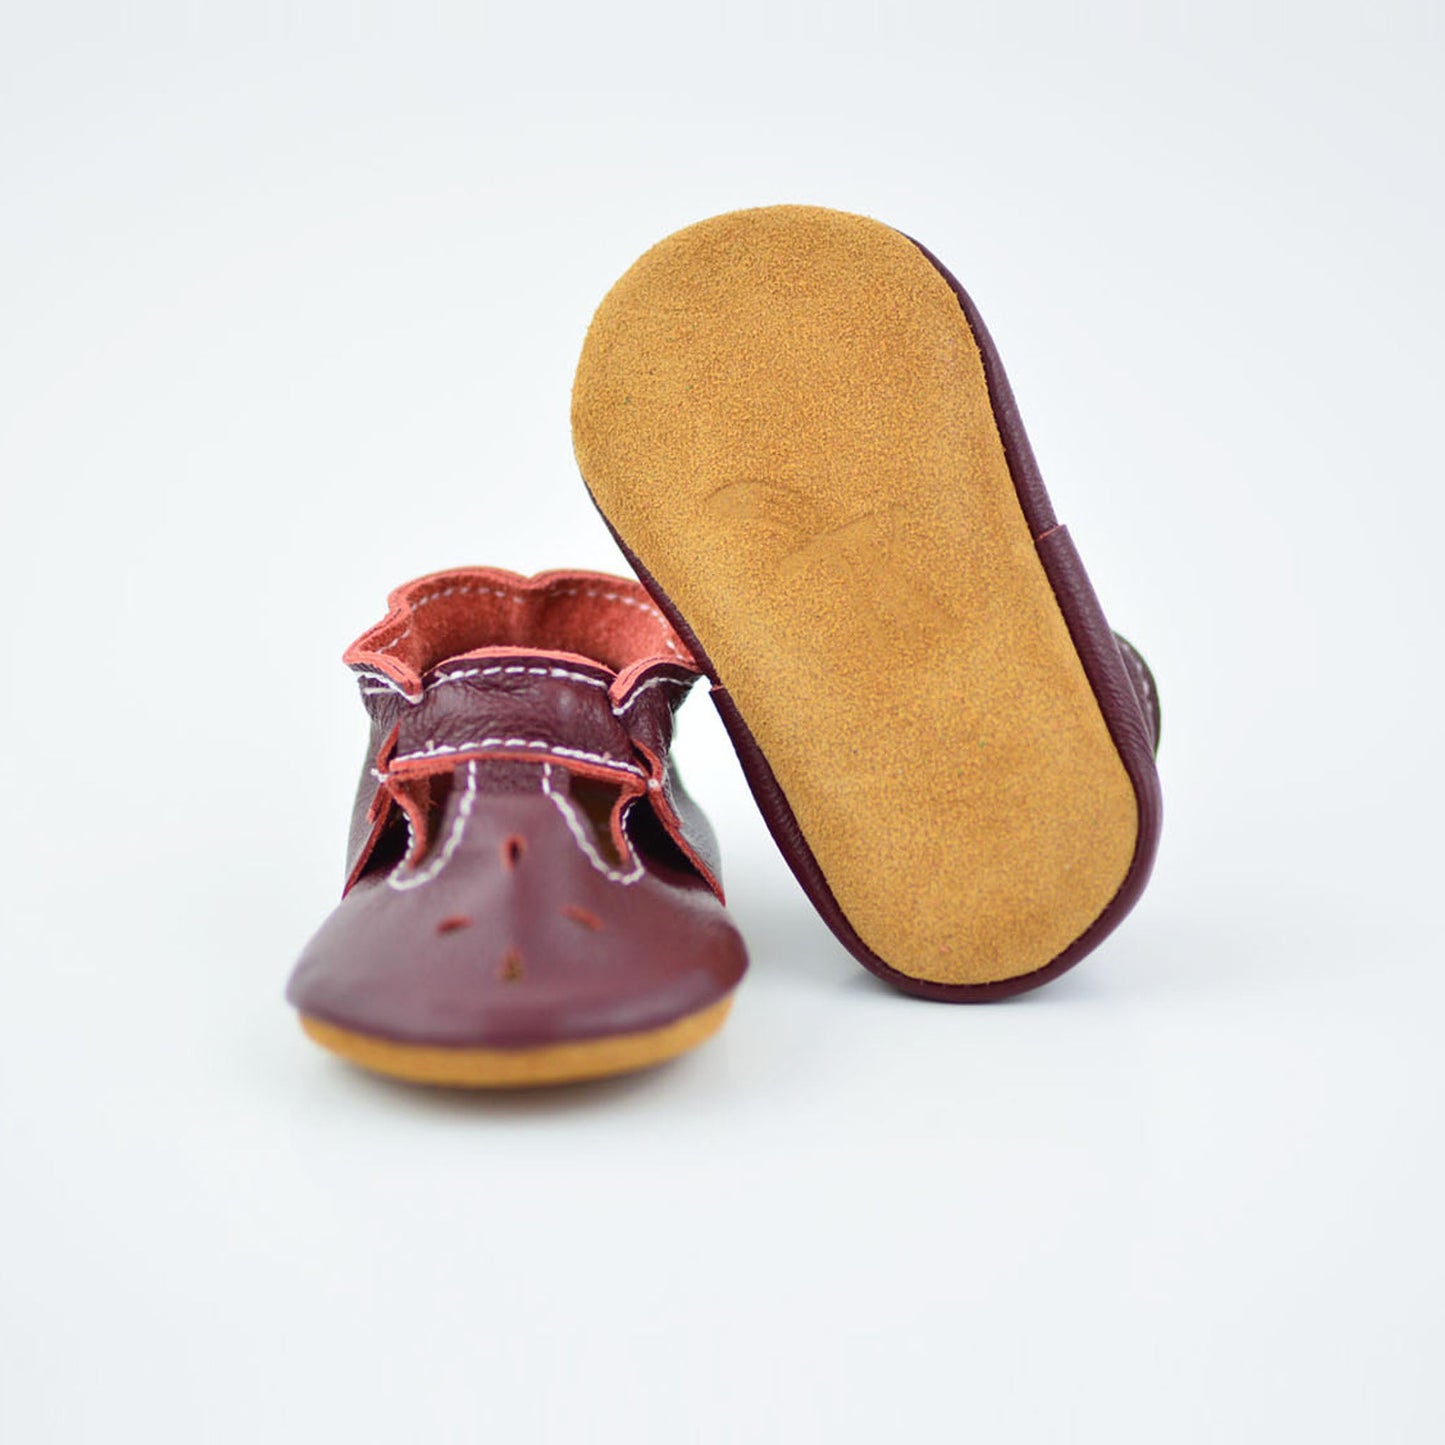 RTS Burgundy T-straps With Tan Suede Leather Soles - Size 3 (12-18M)(5")